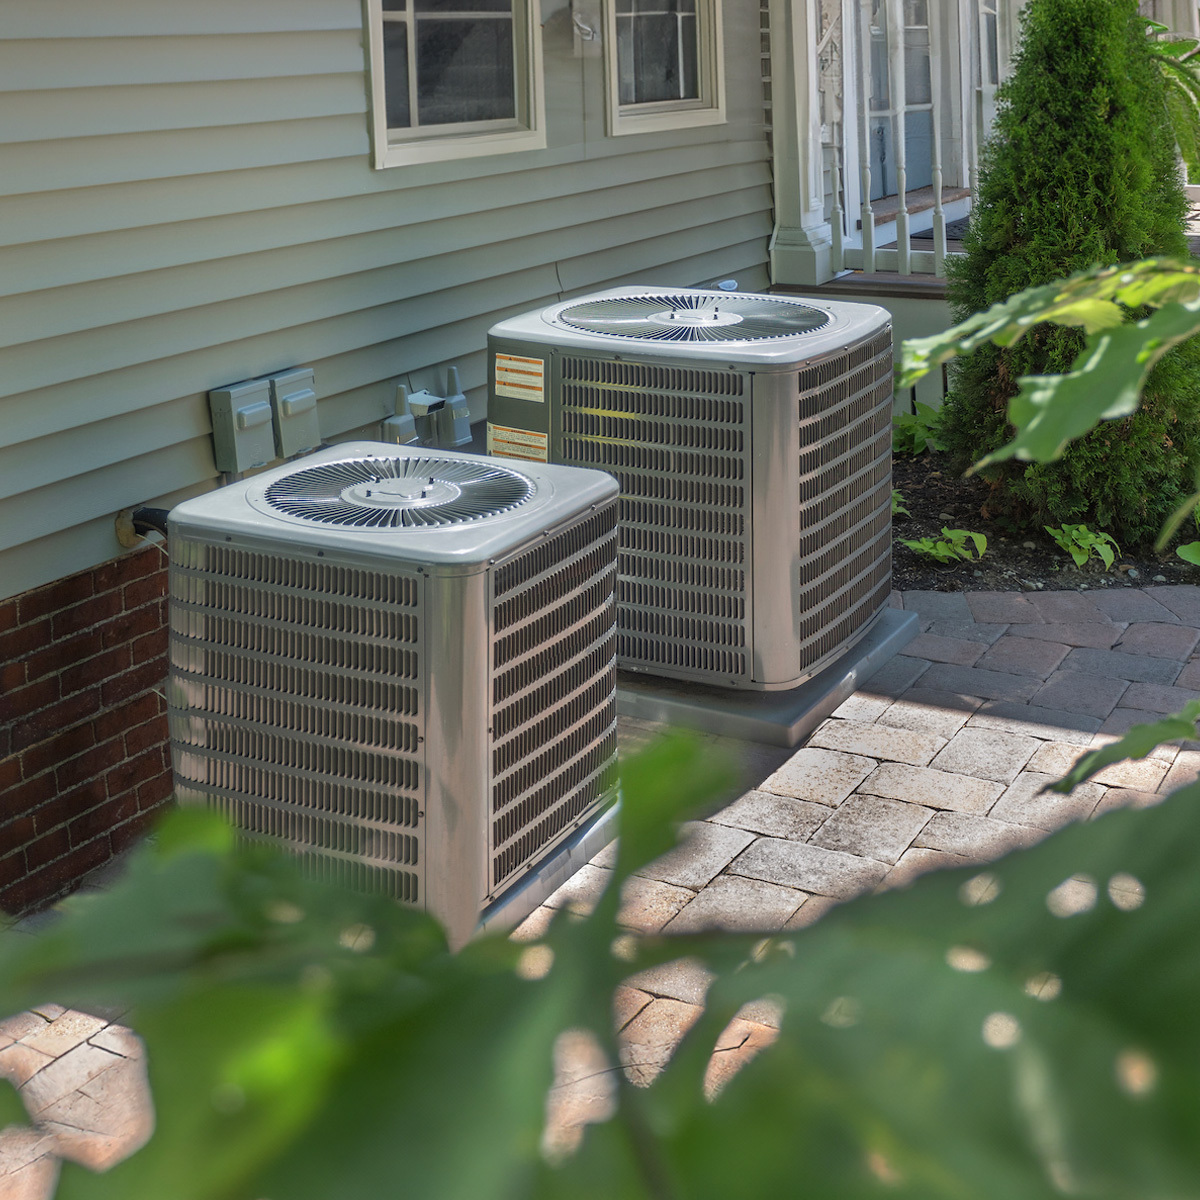 Two outdoor AC units next to one another on a brick floor.